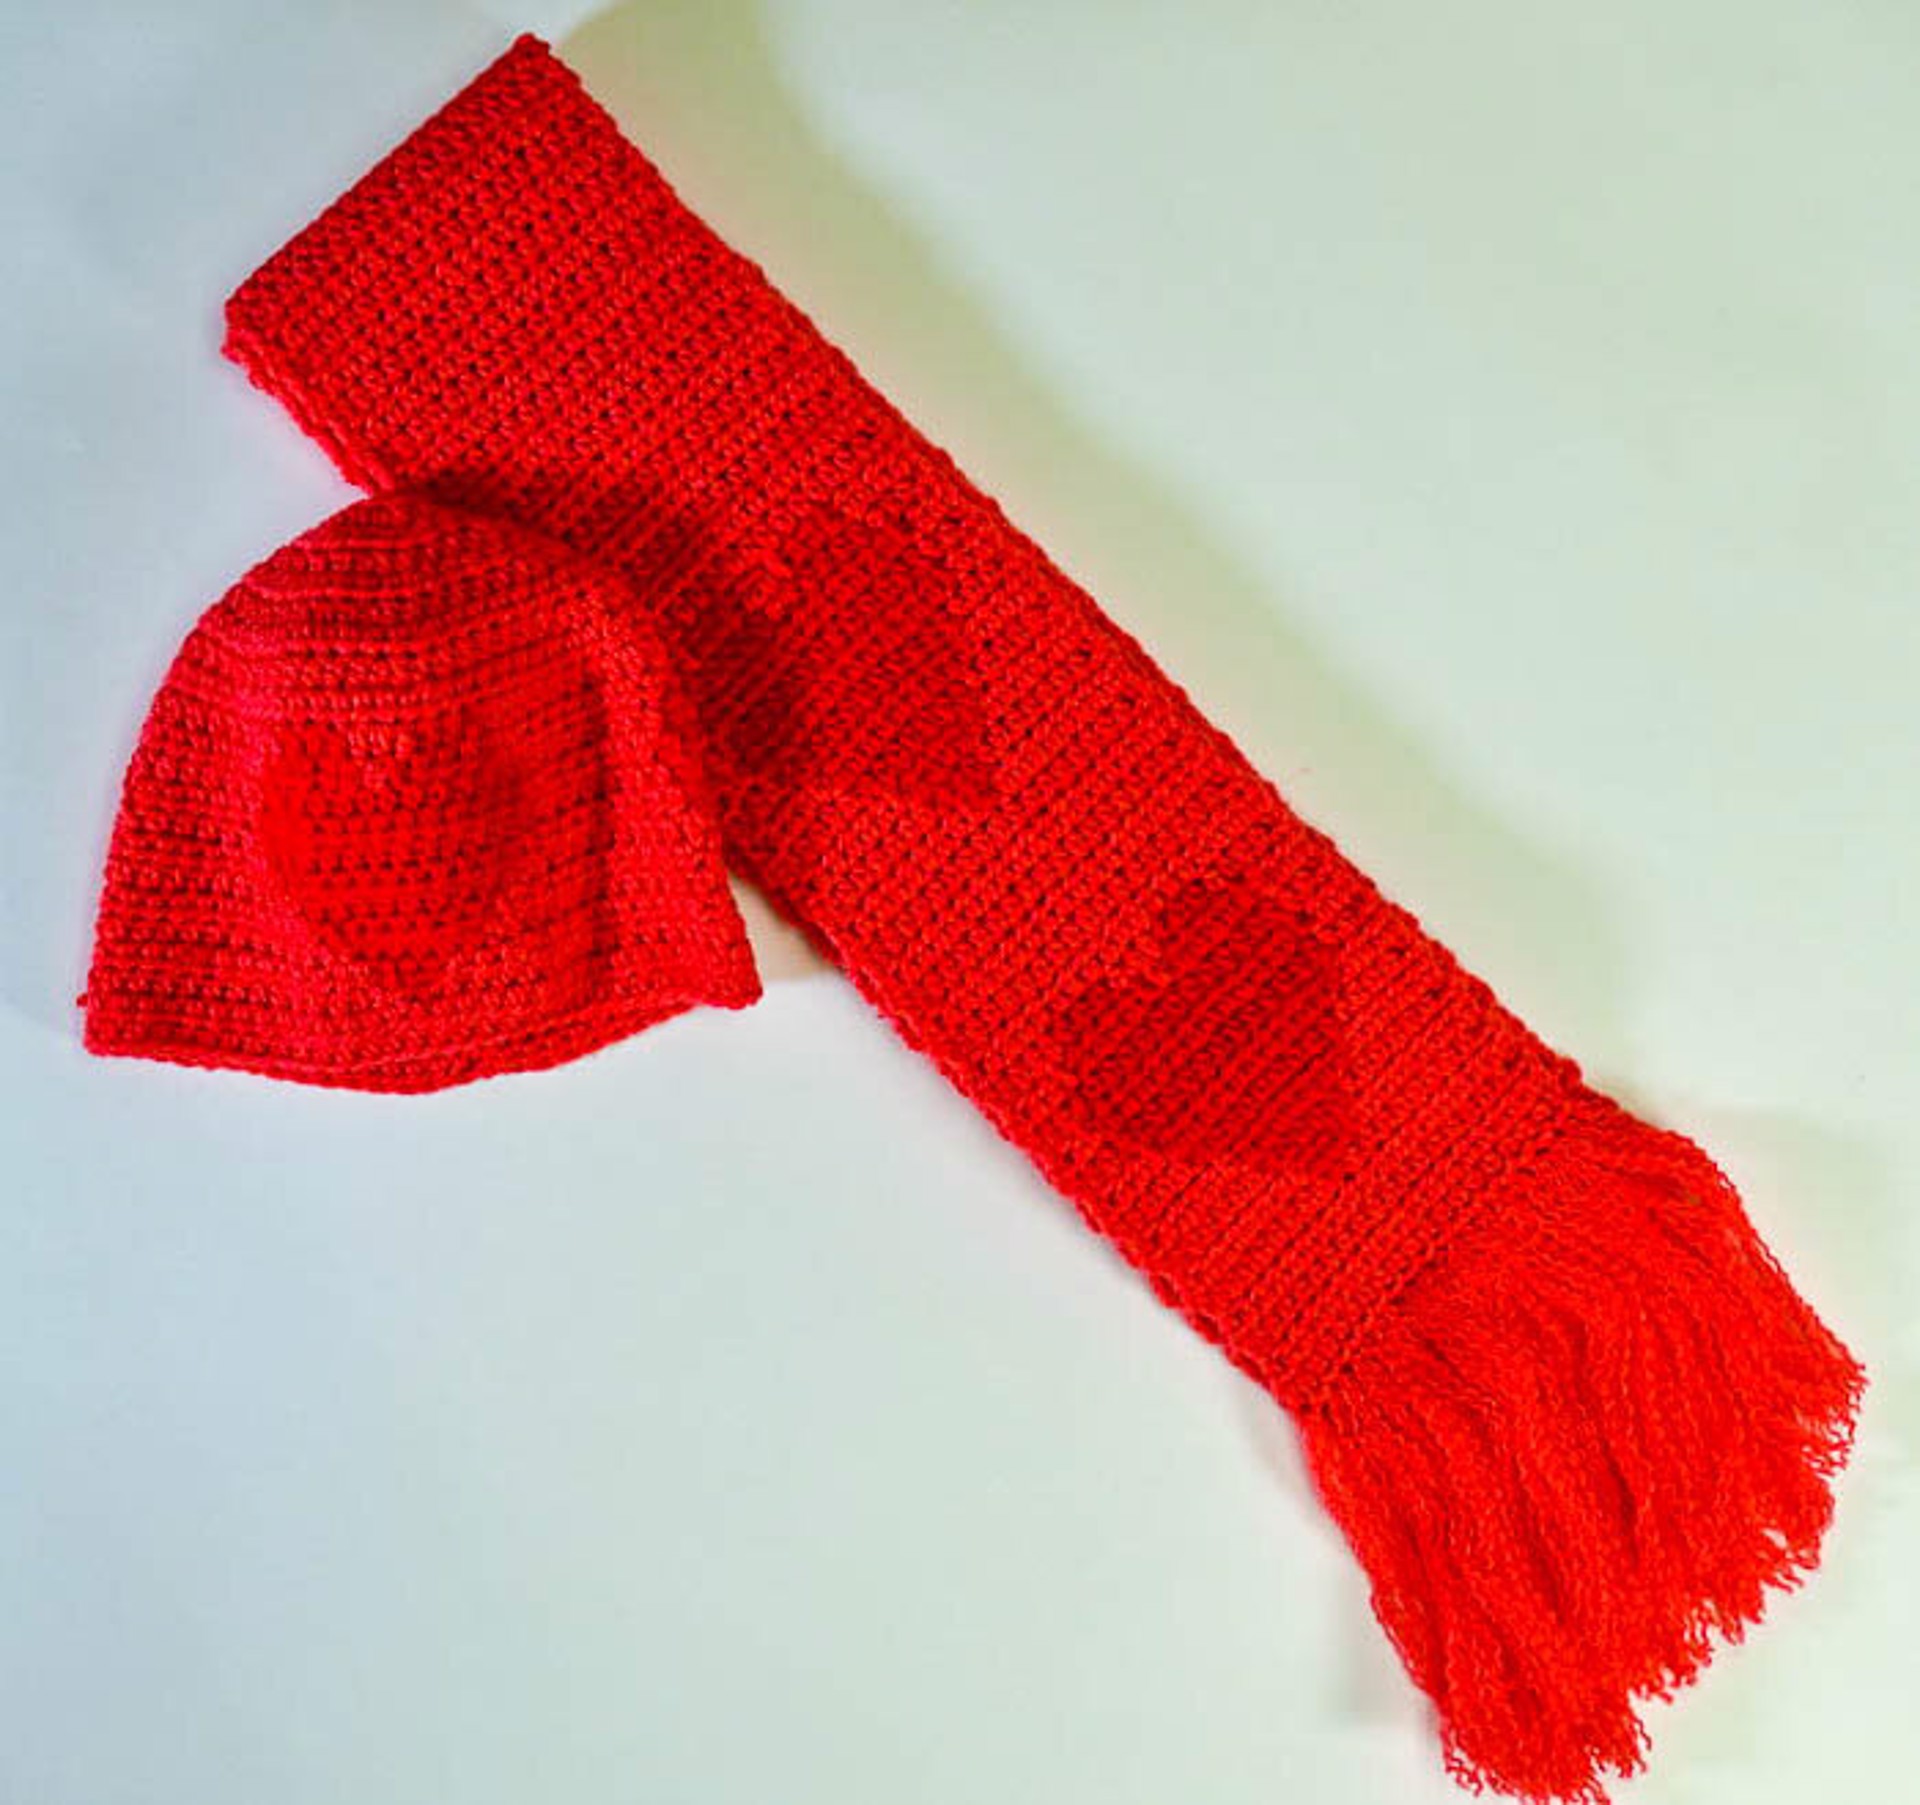 Hearts United (Hat and Scarf Set) by Ian M. Ranney